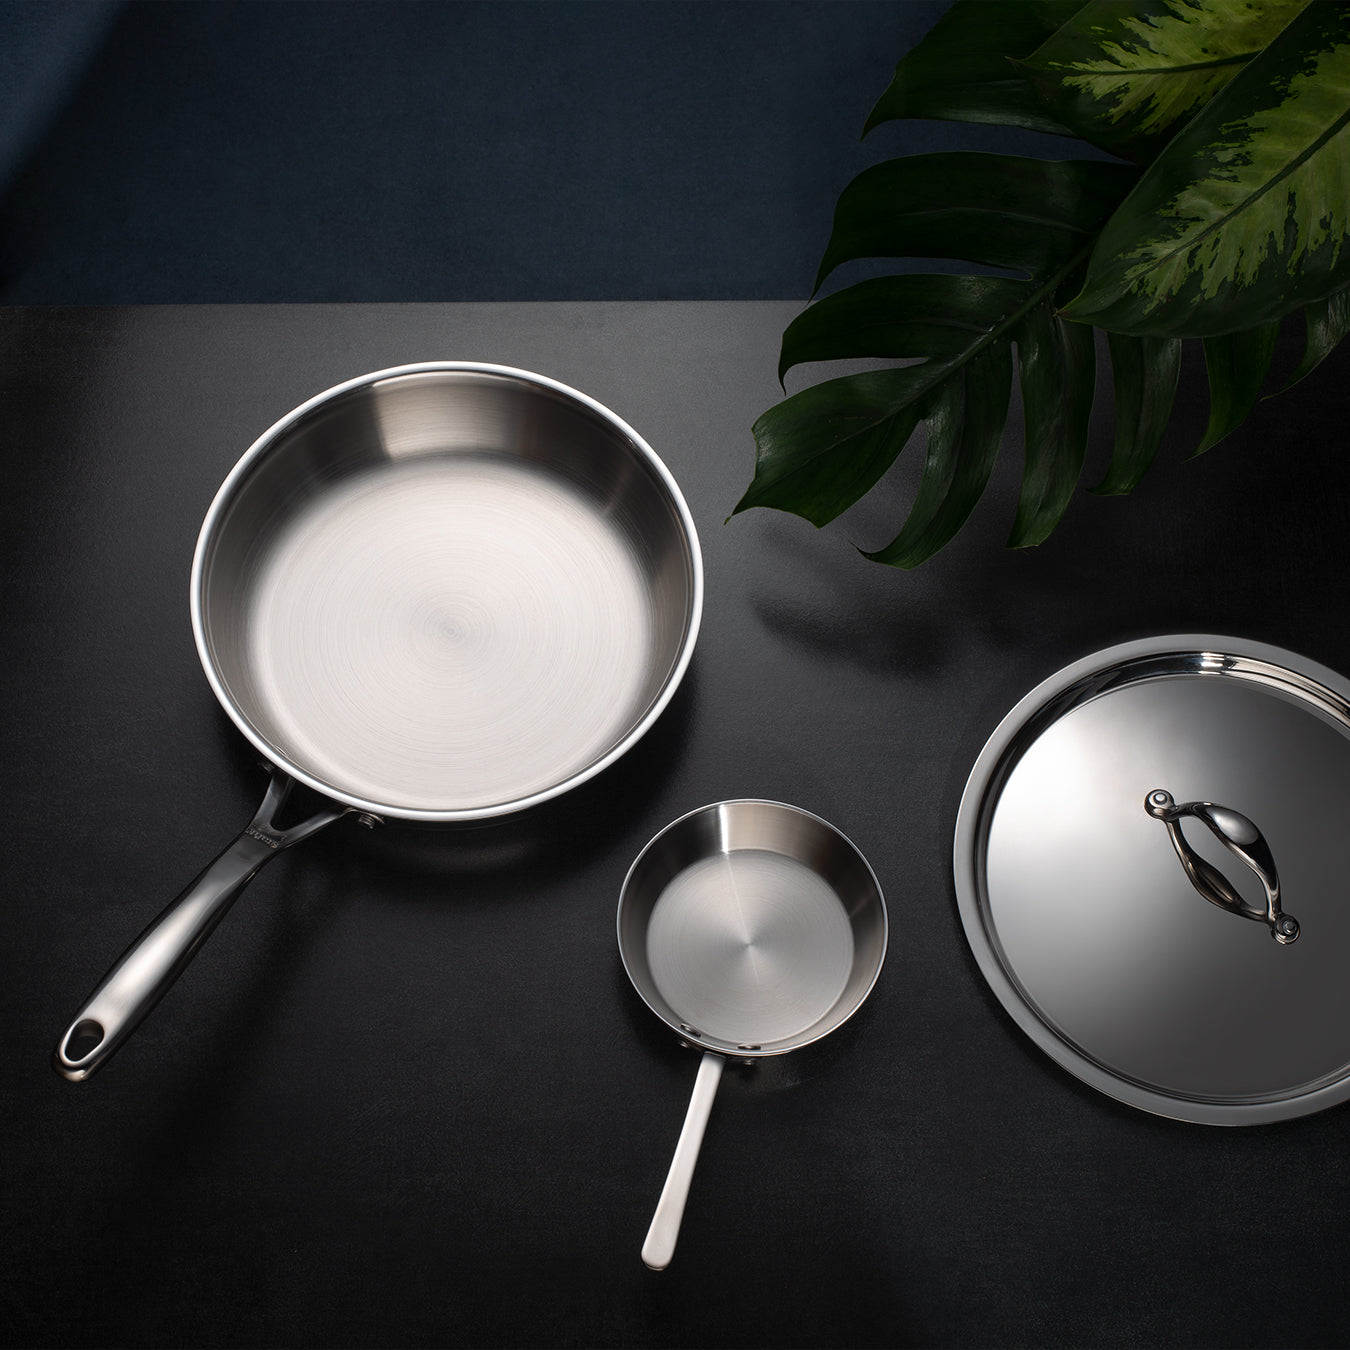 Which Steel Cookware is best? Tri-ply or Nickel Free